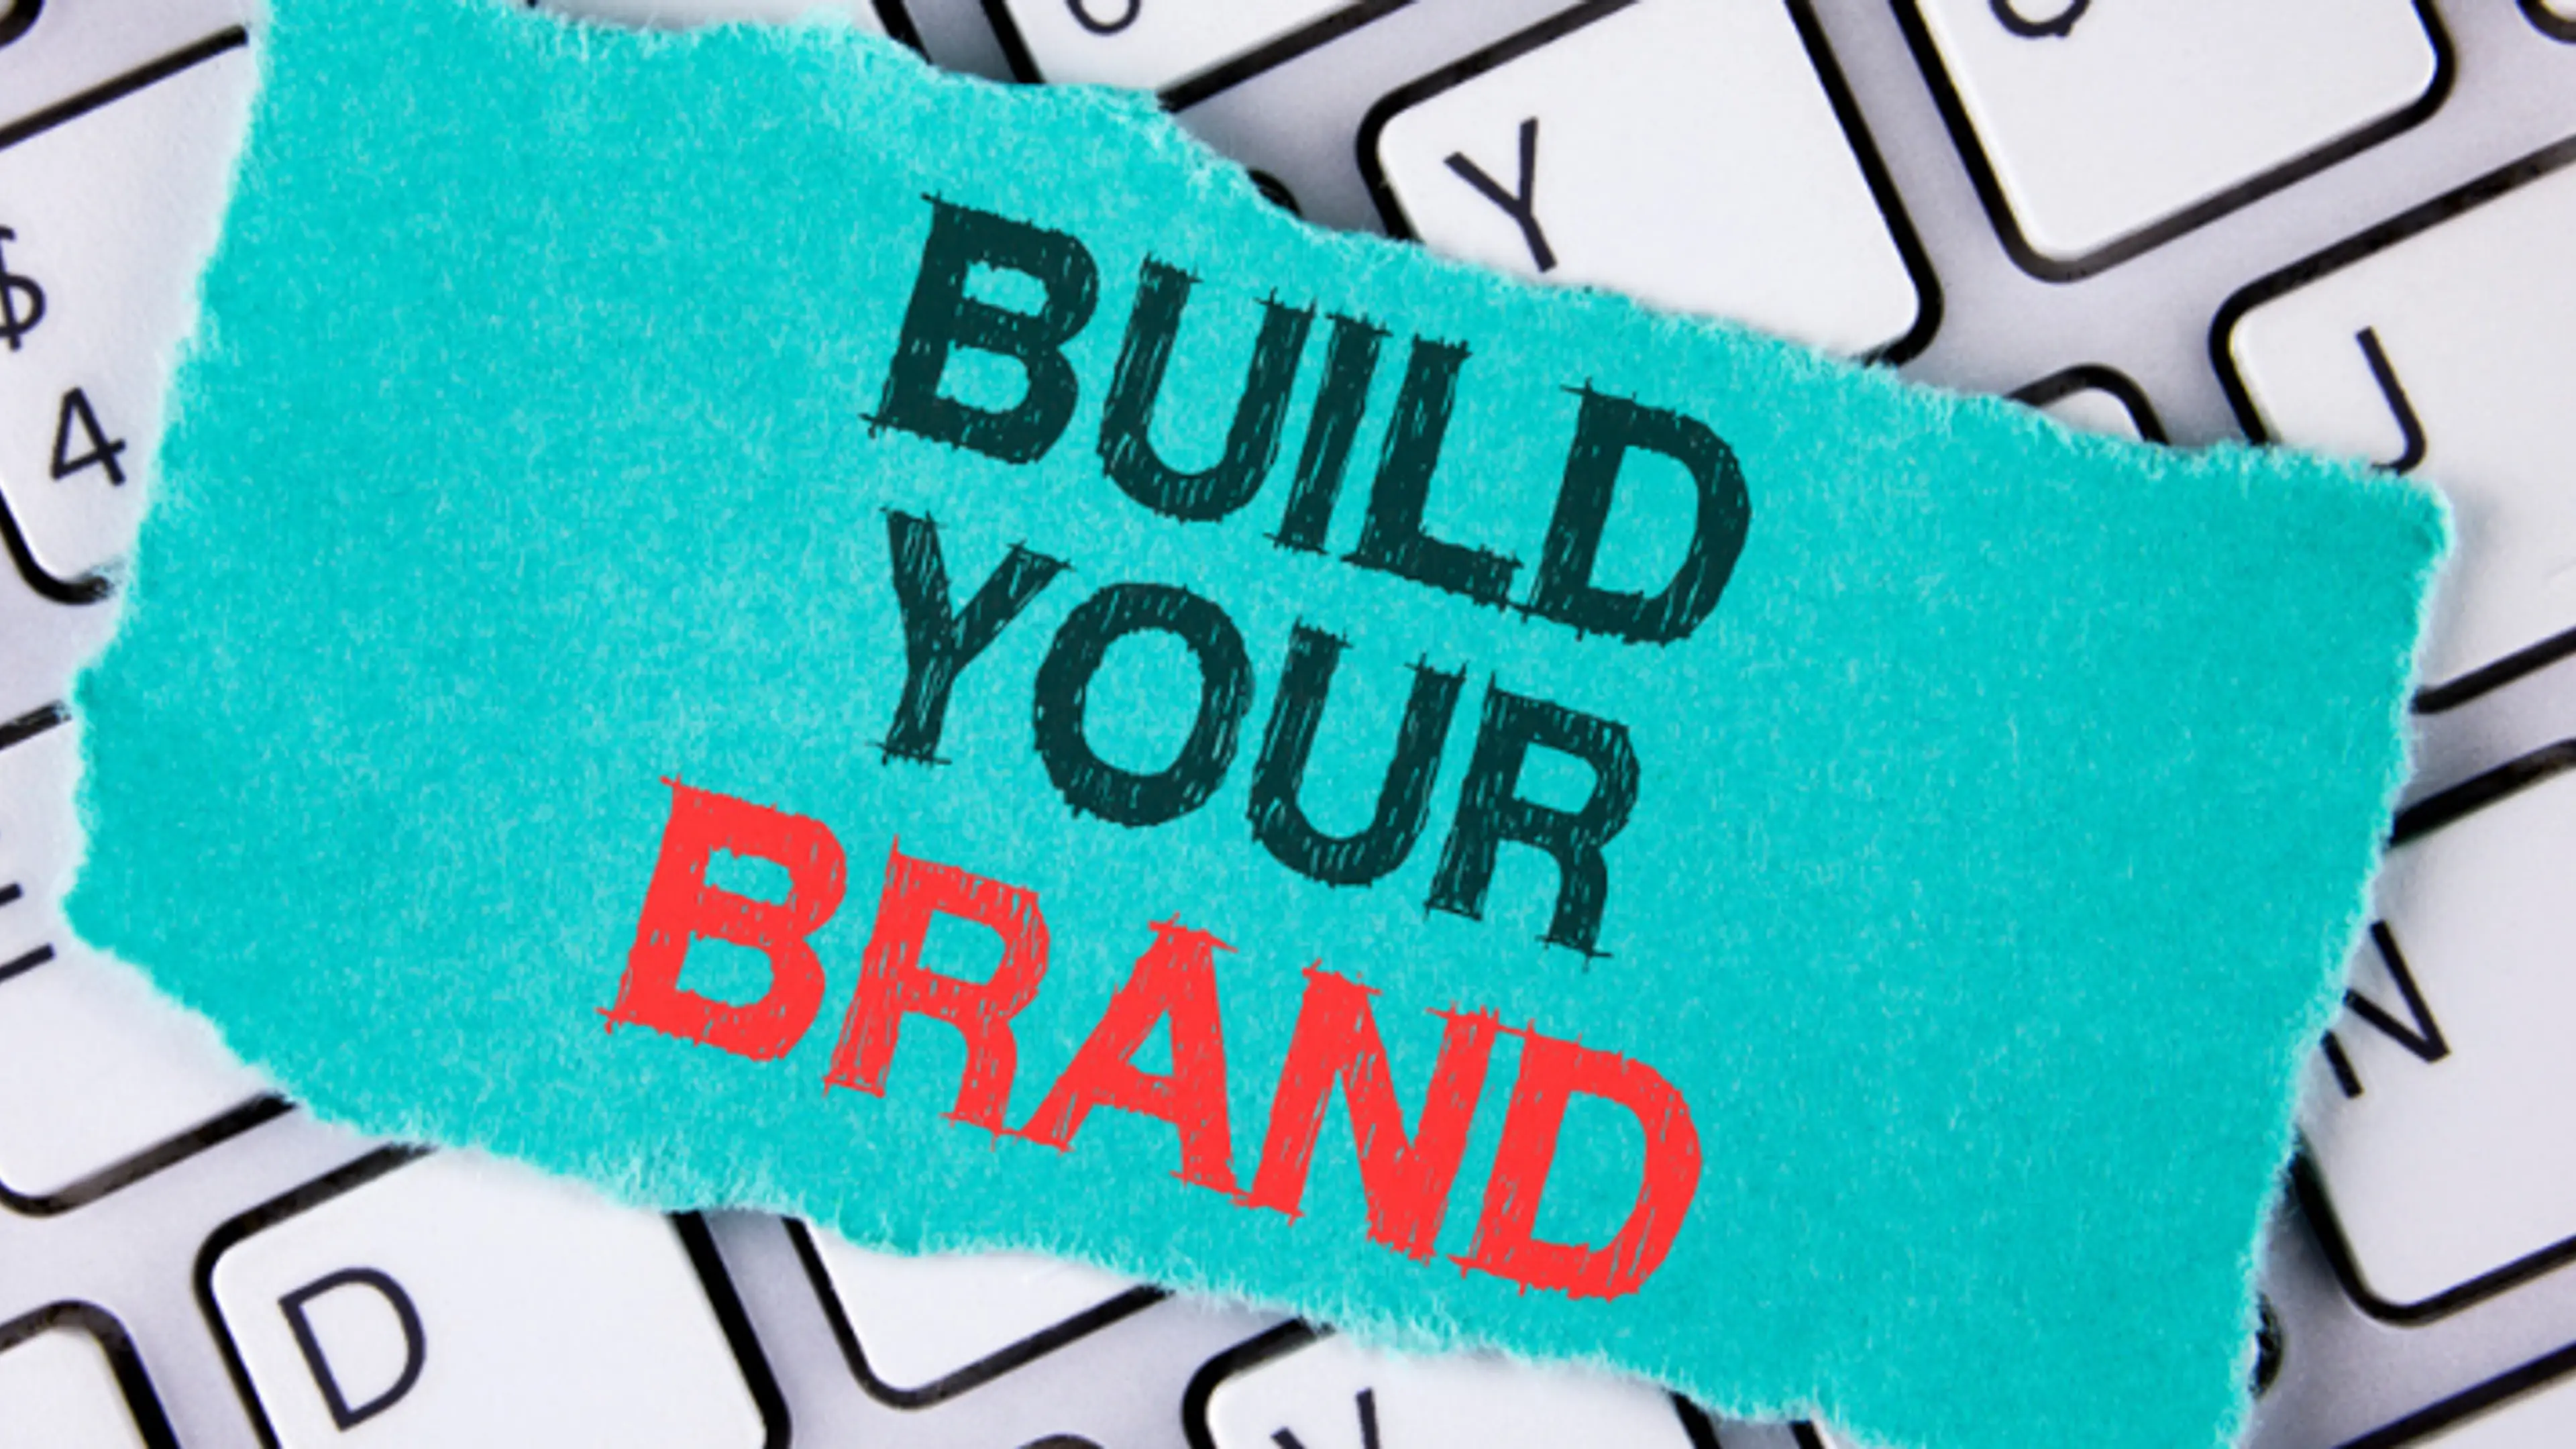 How to build an online brand that stands out and attract customers

